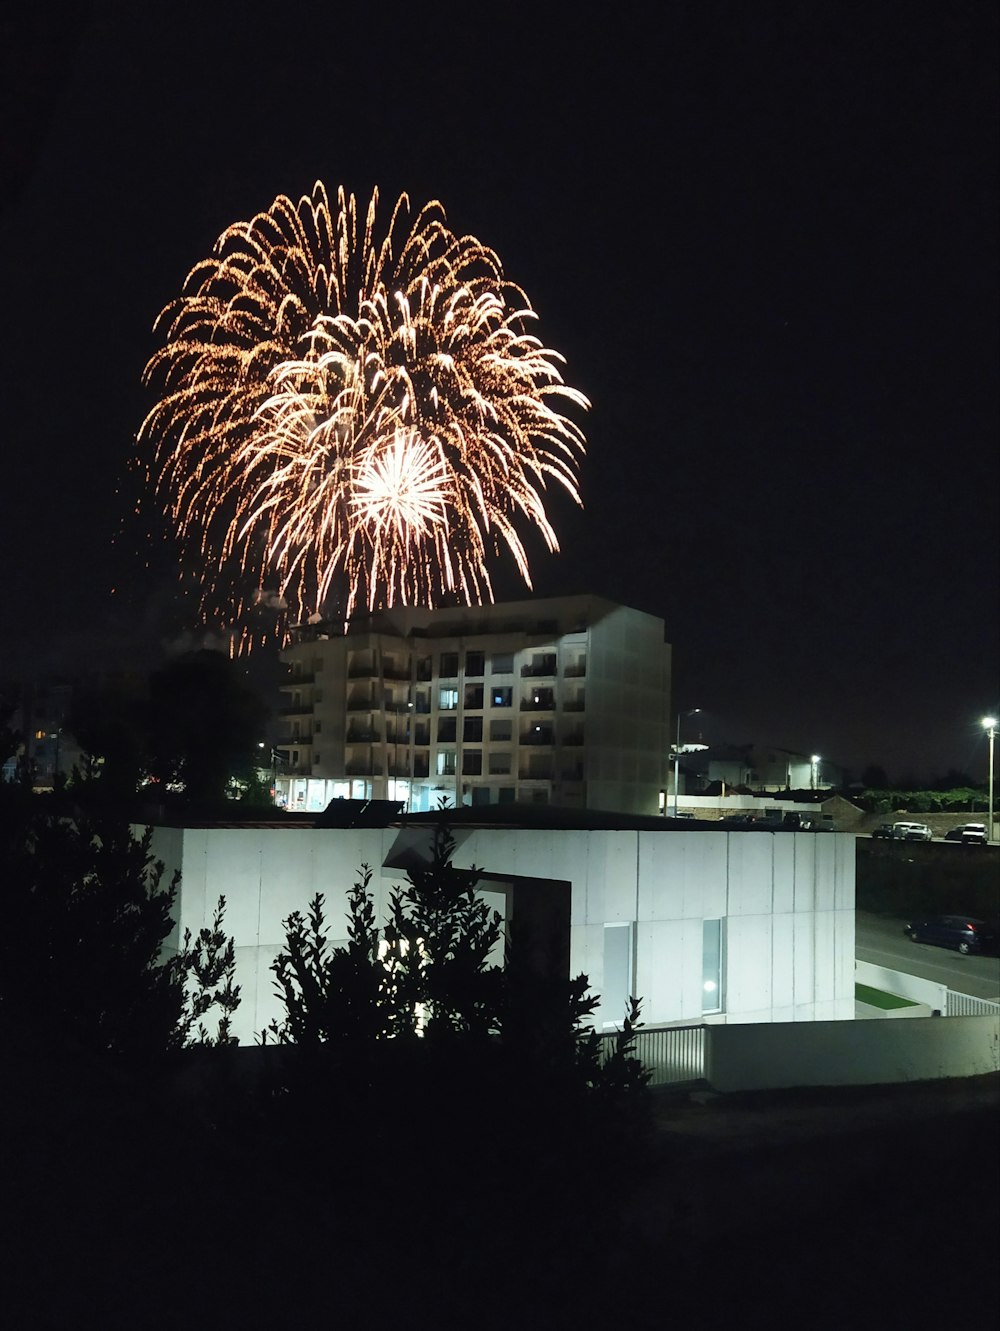 fireworks display over white building during night time